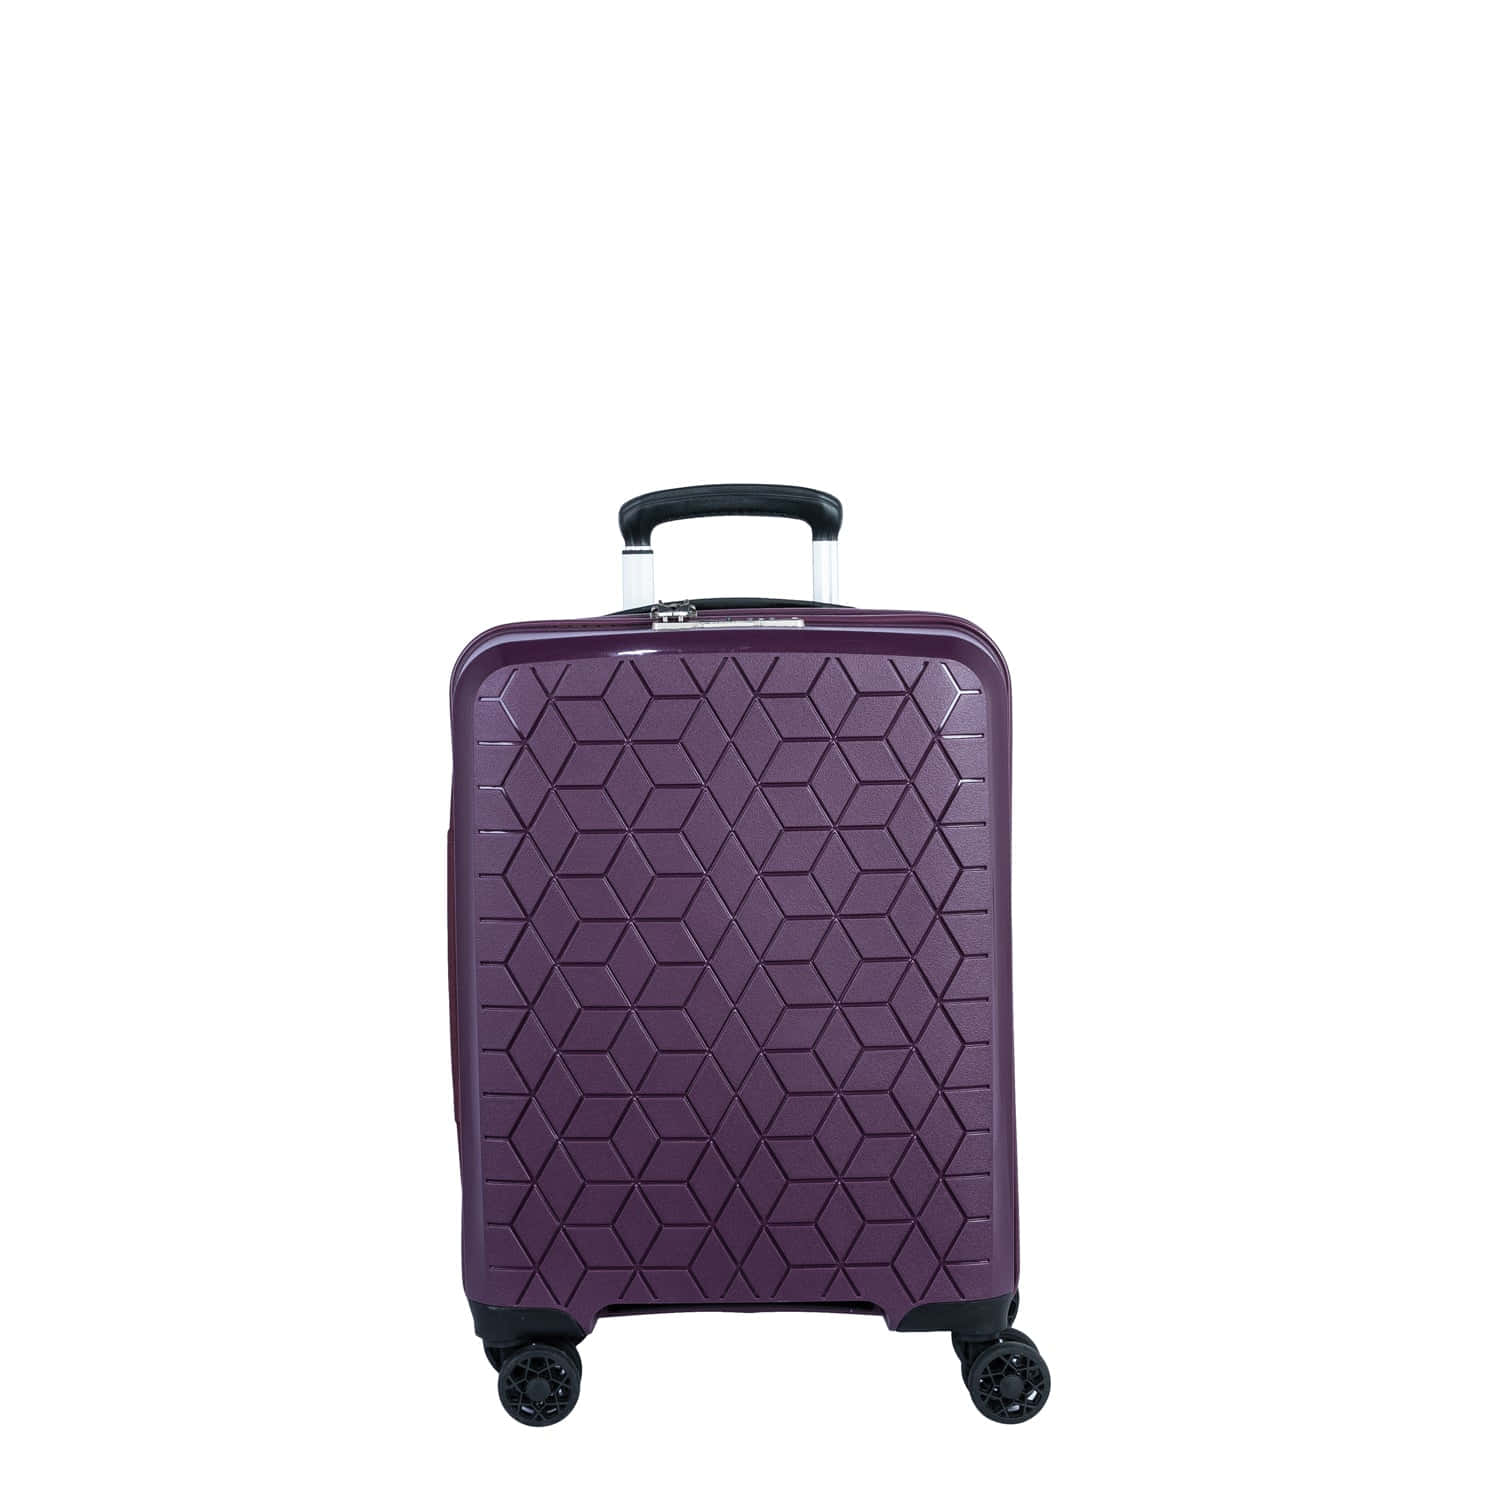 A Variety of Colorful Luggages Wallpaper